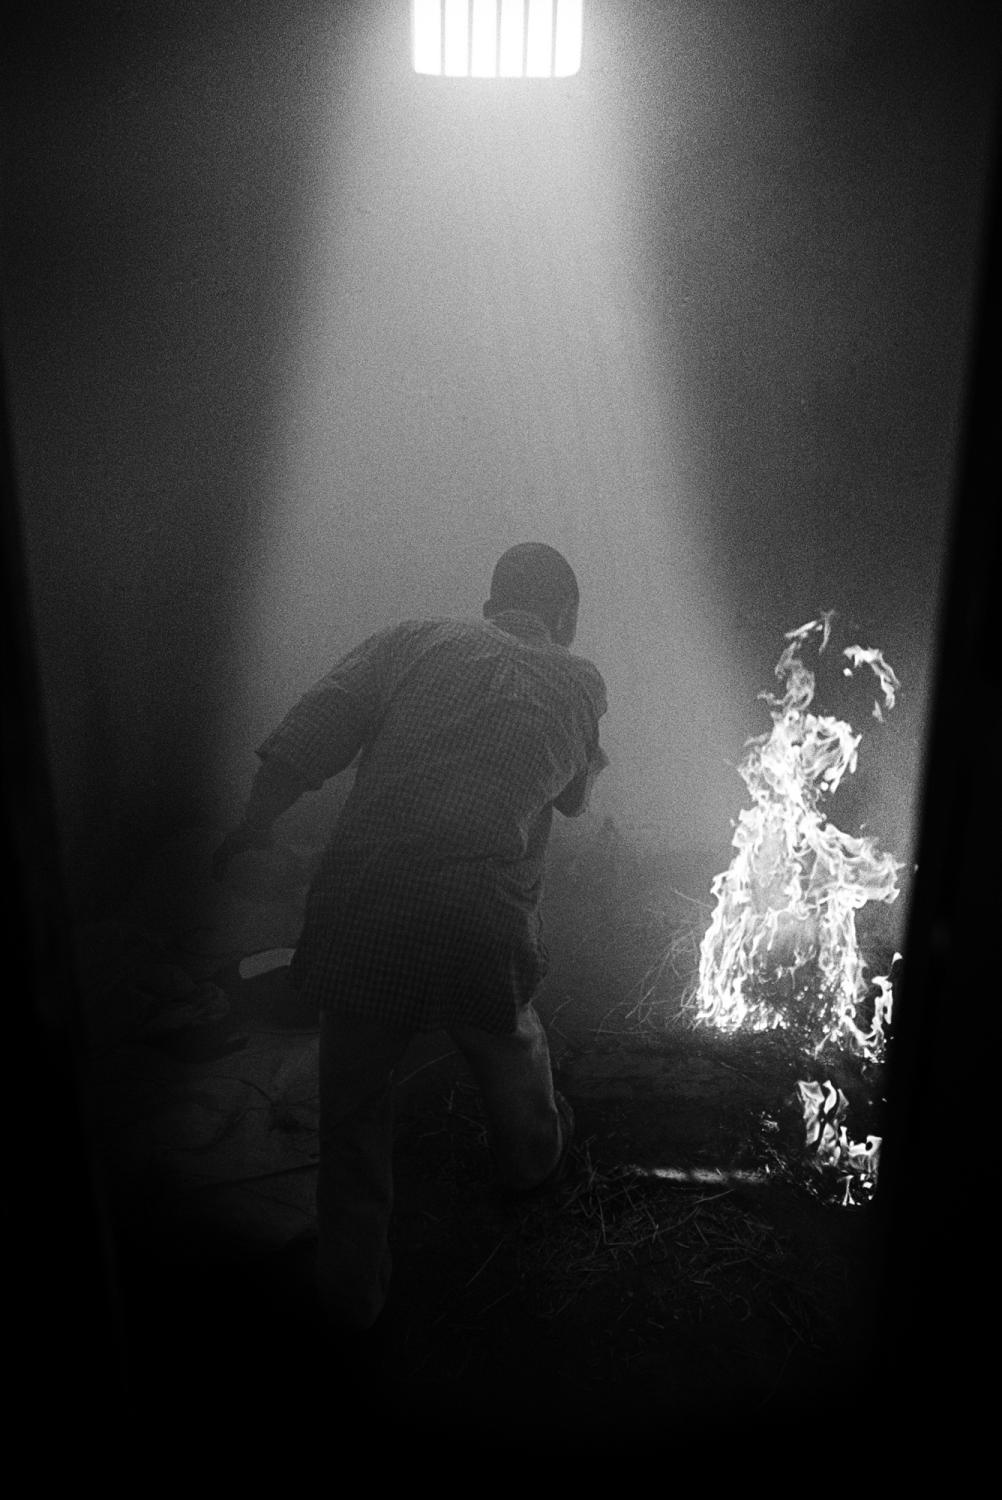 Kissy - SIERRA LEONE Freetown
A burning bed, which has been set...